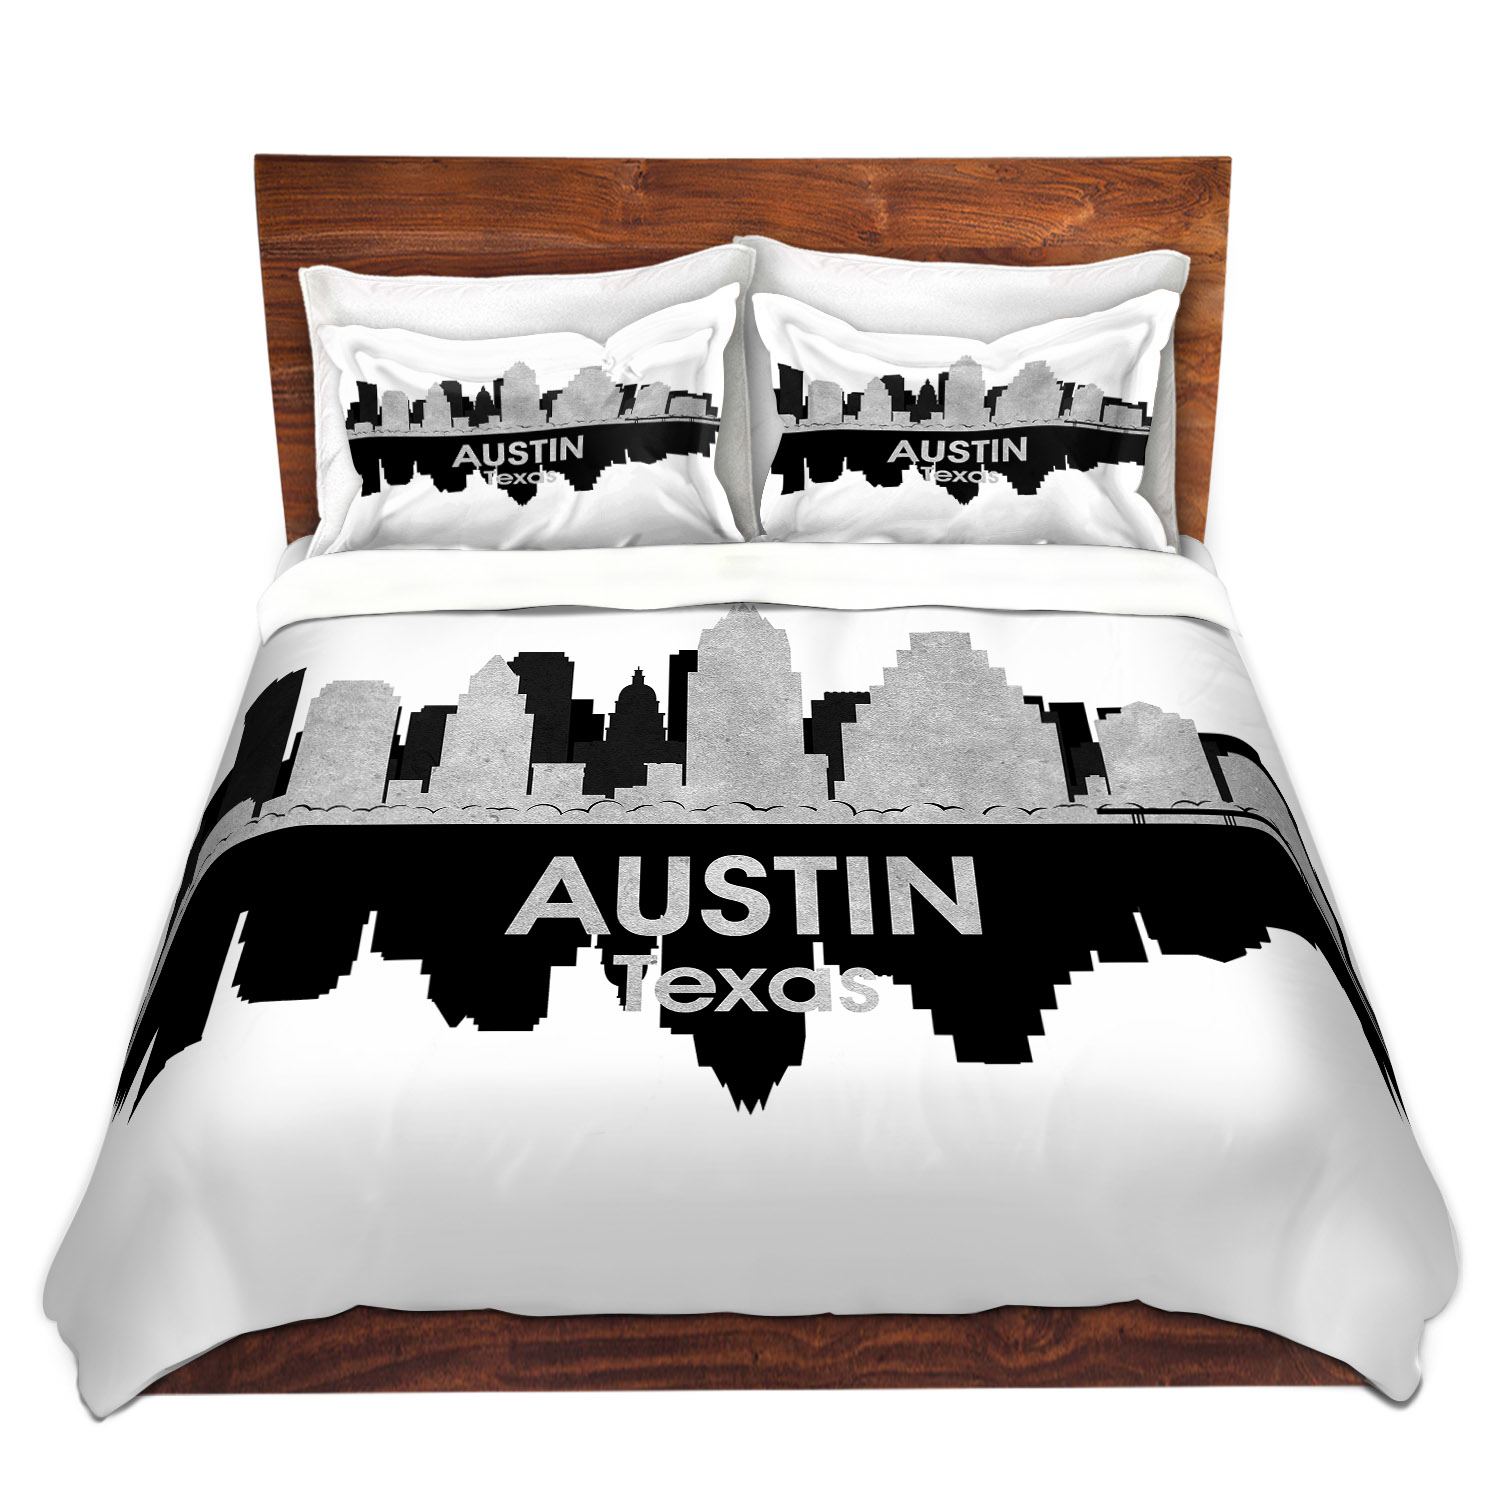 Dianoche Microfiber Duvet Covers By Angelina Vick - City Iv Austin Texas